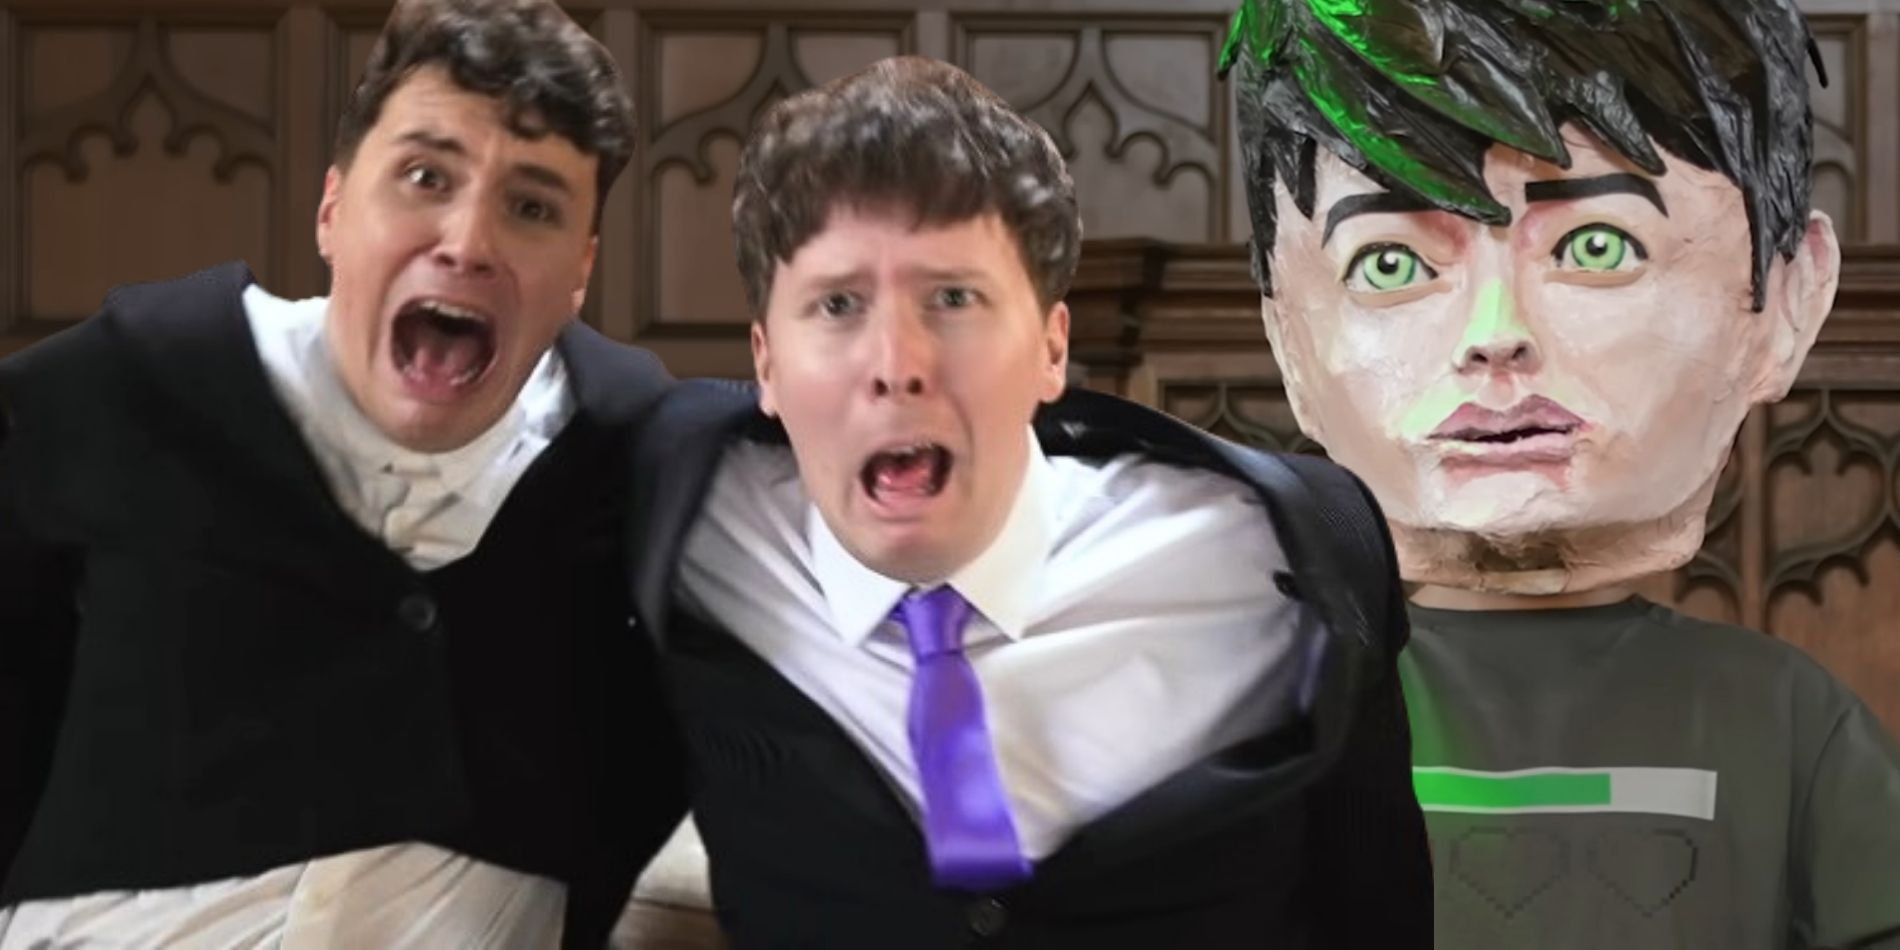 Dan Howell, Phil Lester and Dil Howlster Dan and Phil Games YouTube Channel Announcement